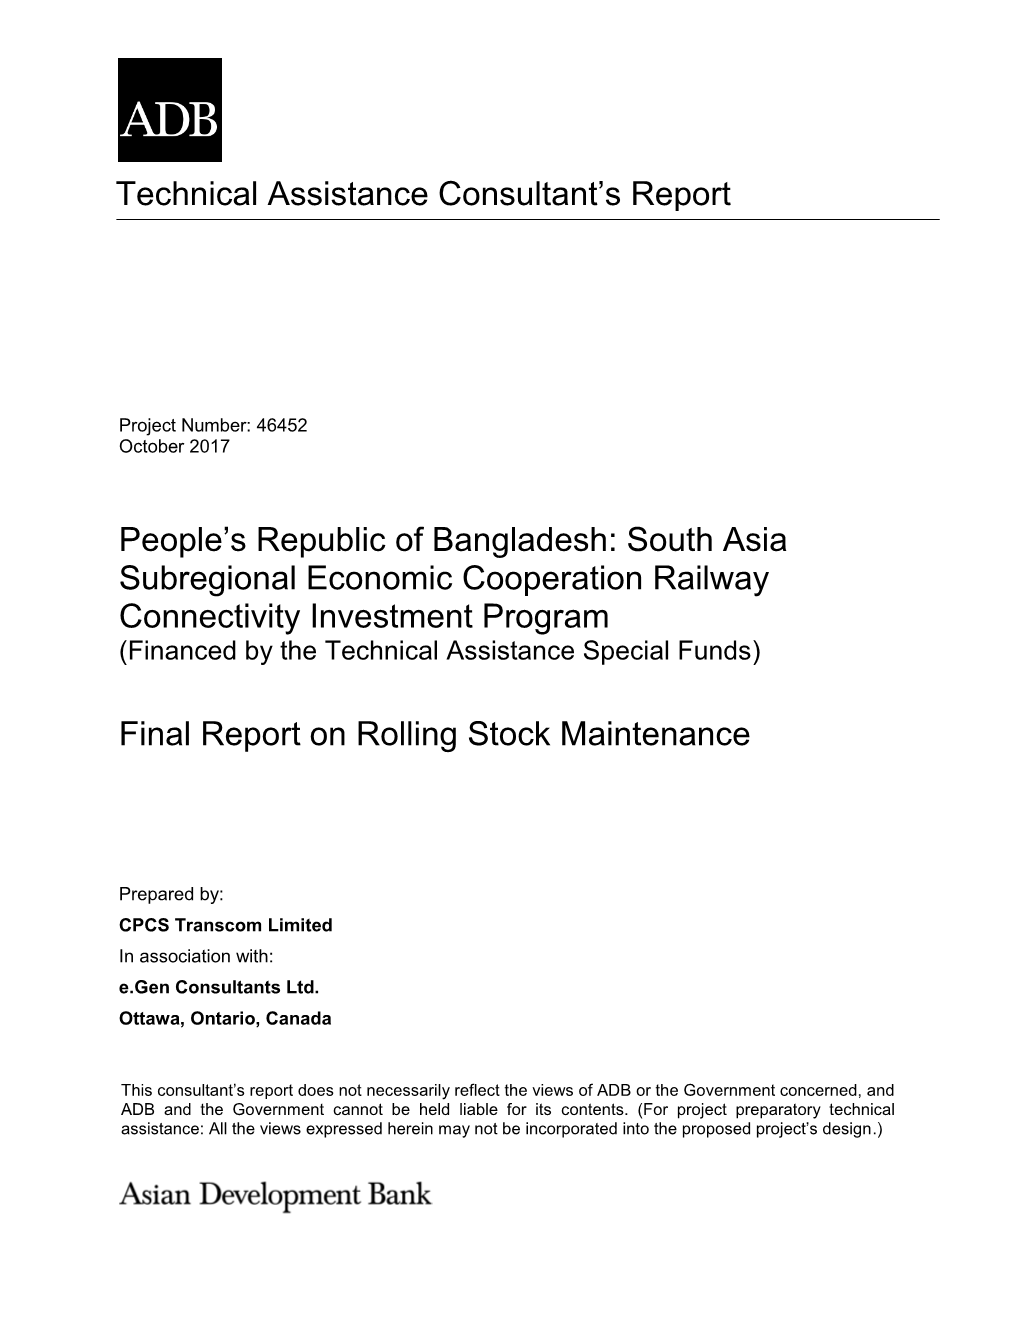 Final Report on Rolling Stock Maintenance